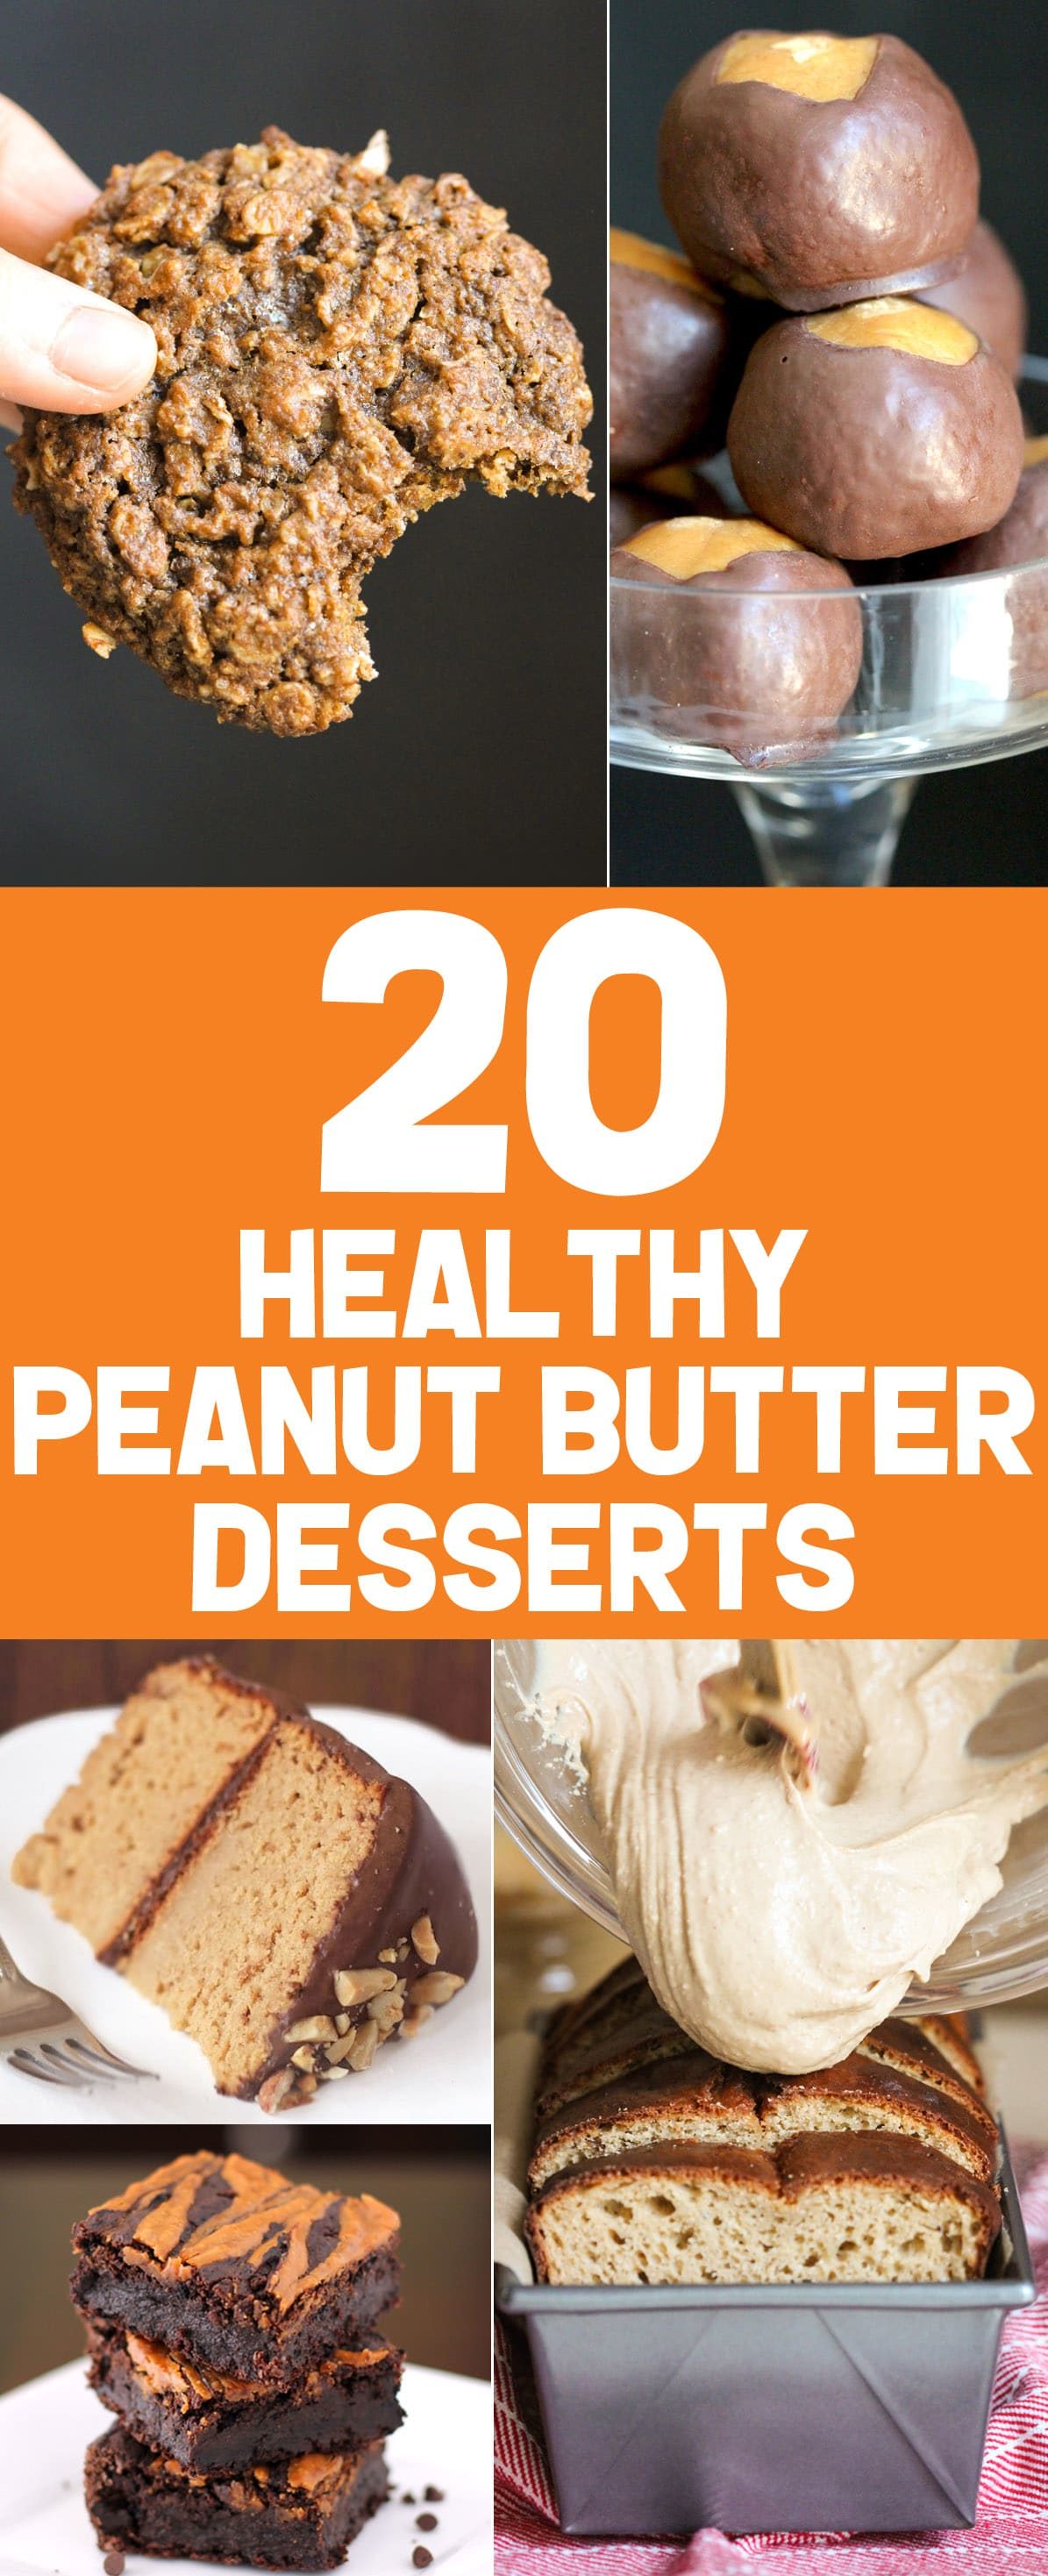 Let the peanut butter lover inside you go ham with these 20 healthy peanut butter desserts! From chewy peanut butter cookies to fluffy peanut butter mousse, from peanut butter cake to buckeye balls, and more. There are options for everyone, with sugar free, low carb, low fat, high protein, high fiber, gluten free, dairy free, vegan, and keto recipes! #glutenfreedessert #lowcarbdessert #ketodessert #highprotein #healthycake #glutenfreecake #sugarfreecake #veganbrownies #ketofudge #fatbombs